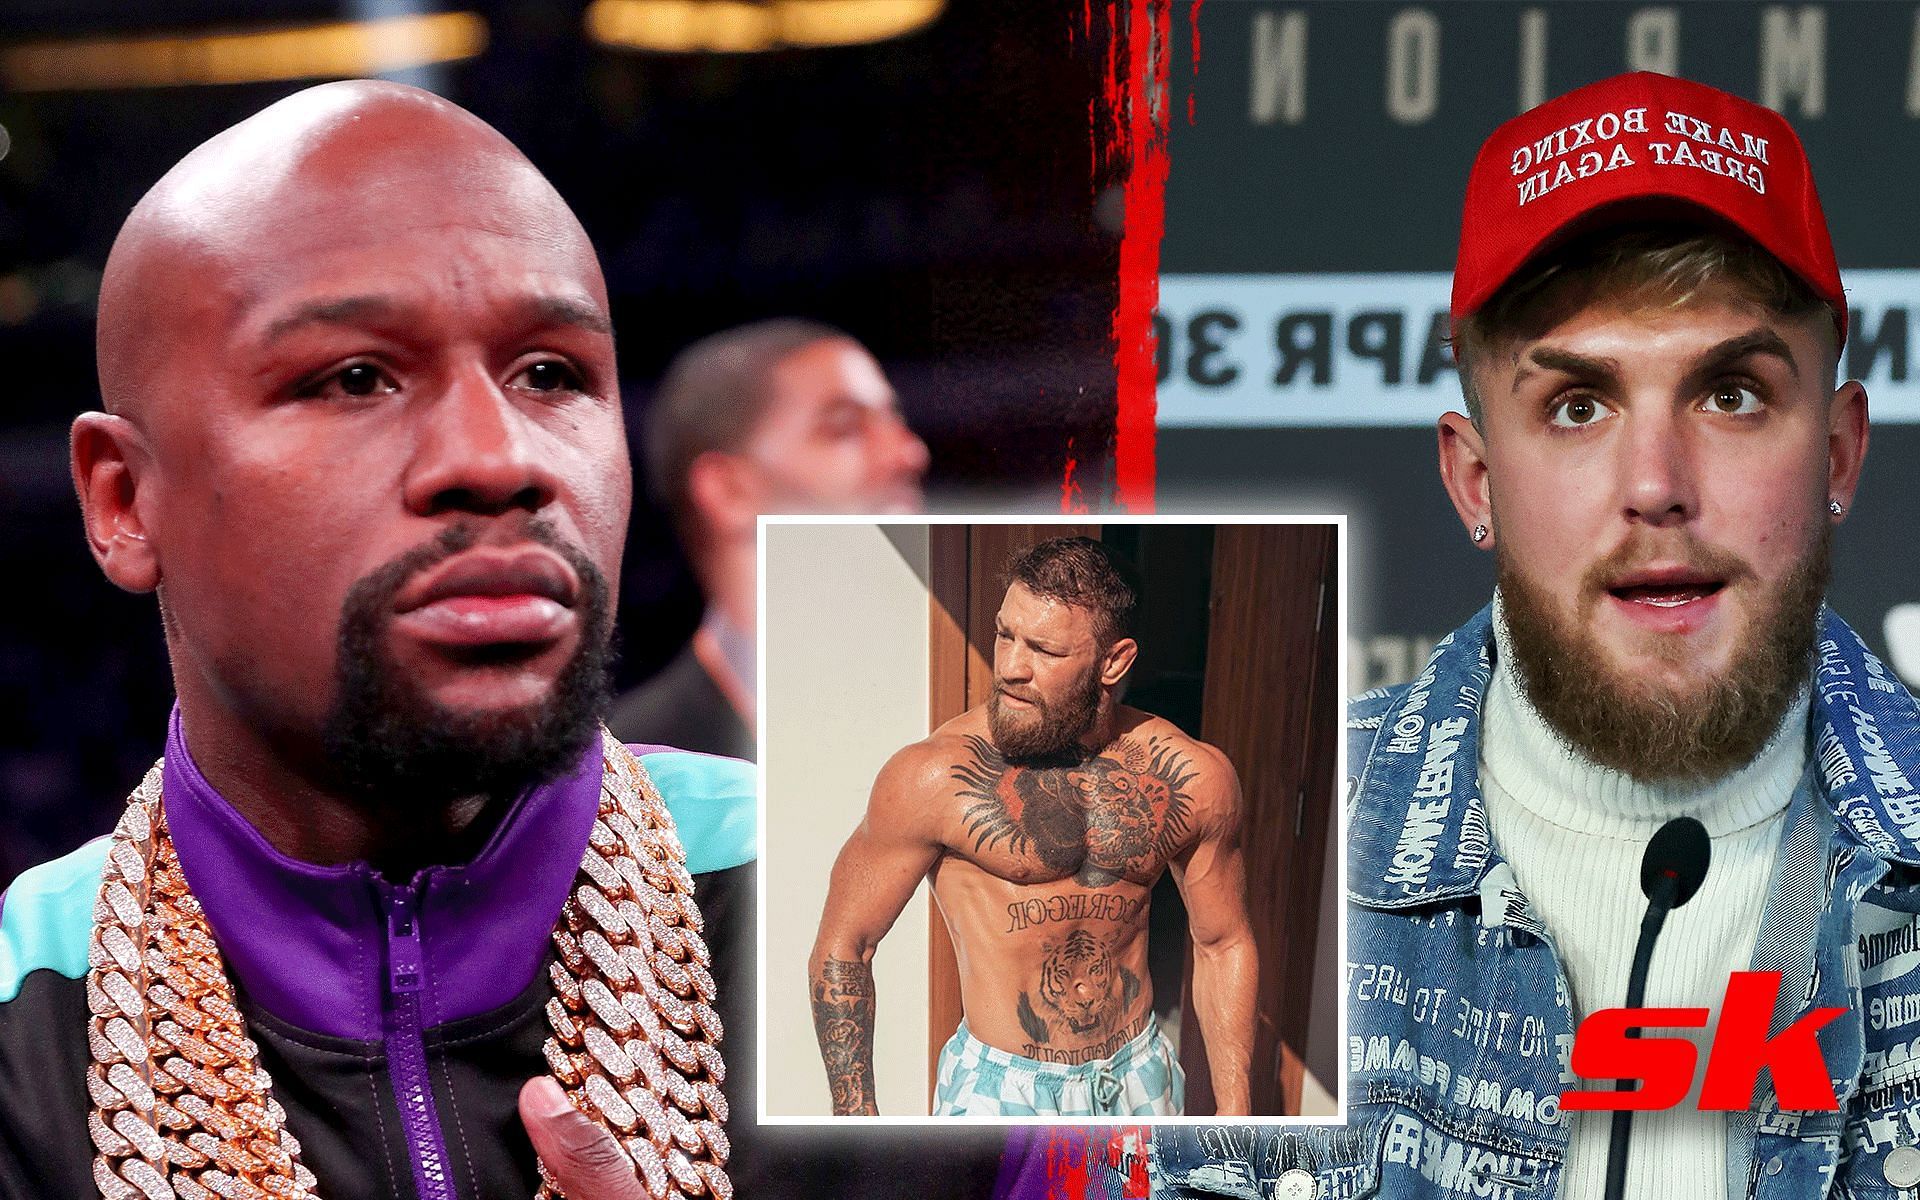 Floyd Mayweather (Left), Conor McGregor (Middle), Jake Paul (Right) [Image courtesy: Getty and @thenotoriousmma on Instagram]